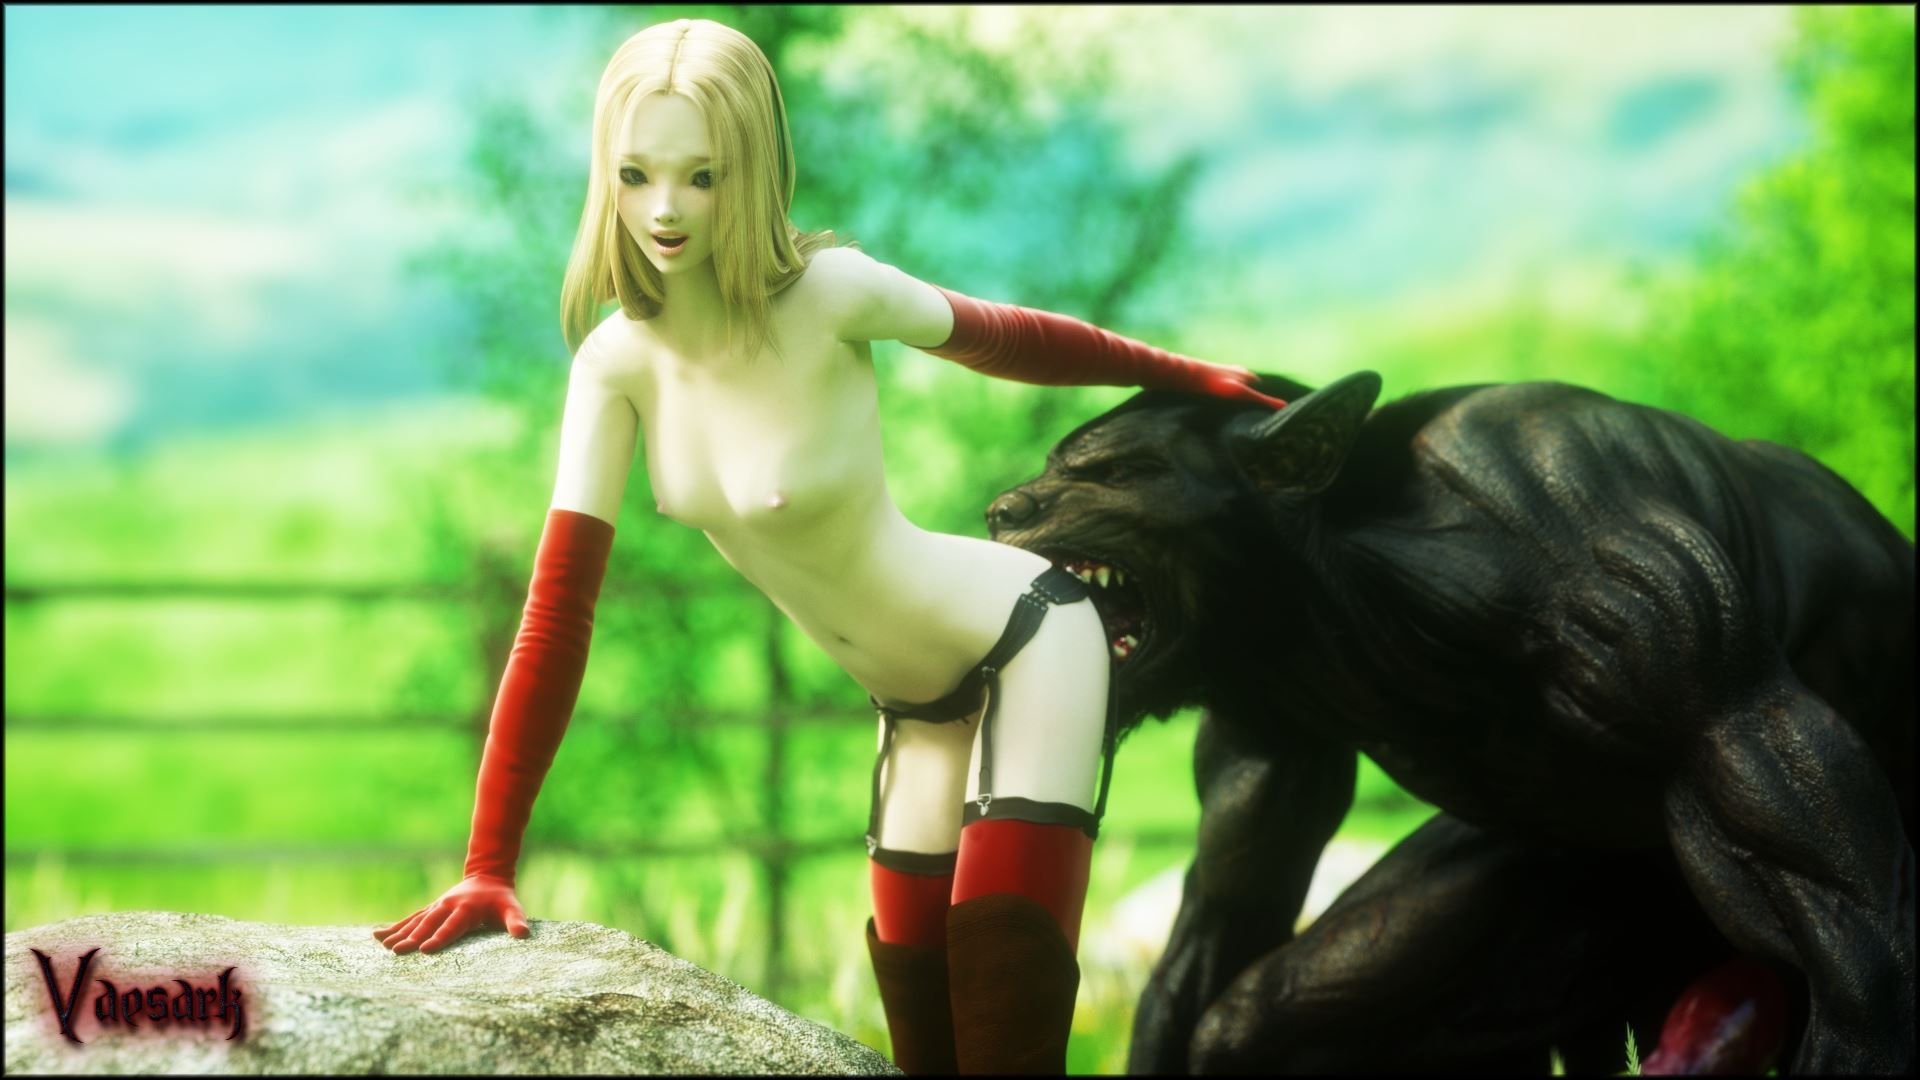 Erotic Adventures Of Little Red Riding Hood: Free Porn 55